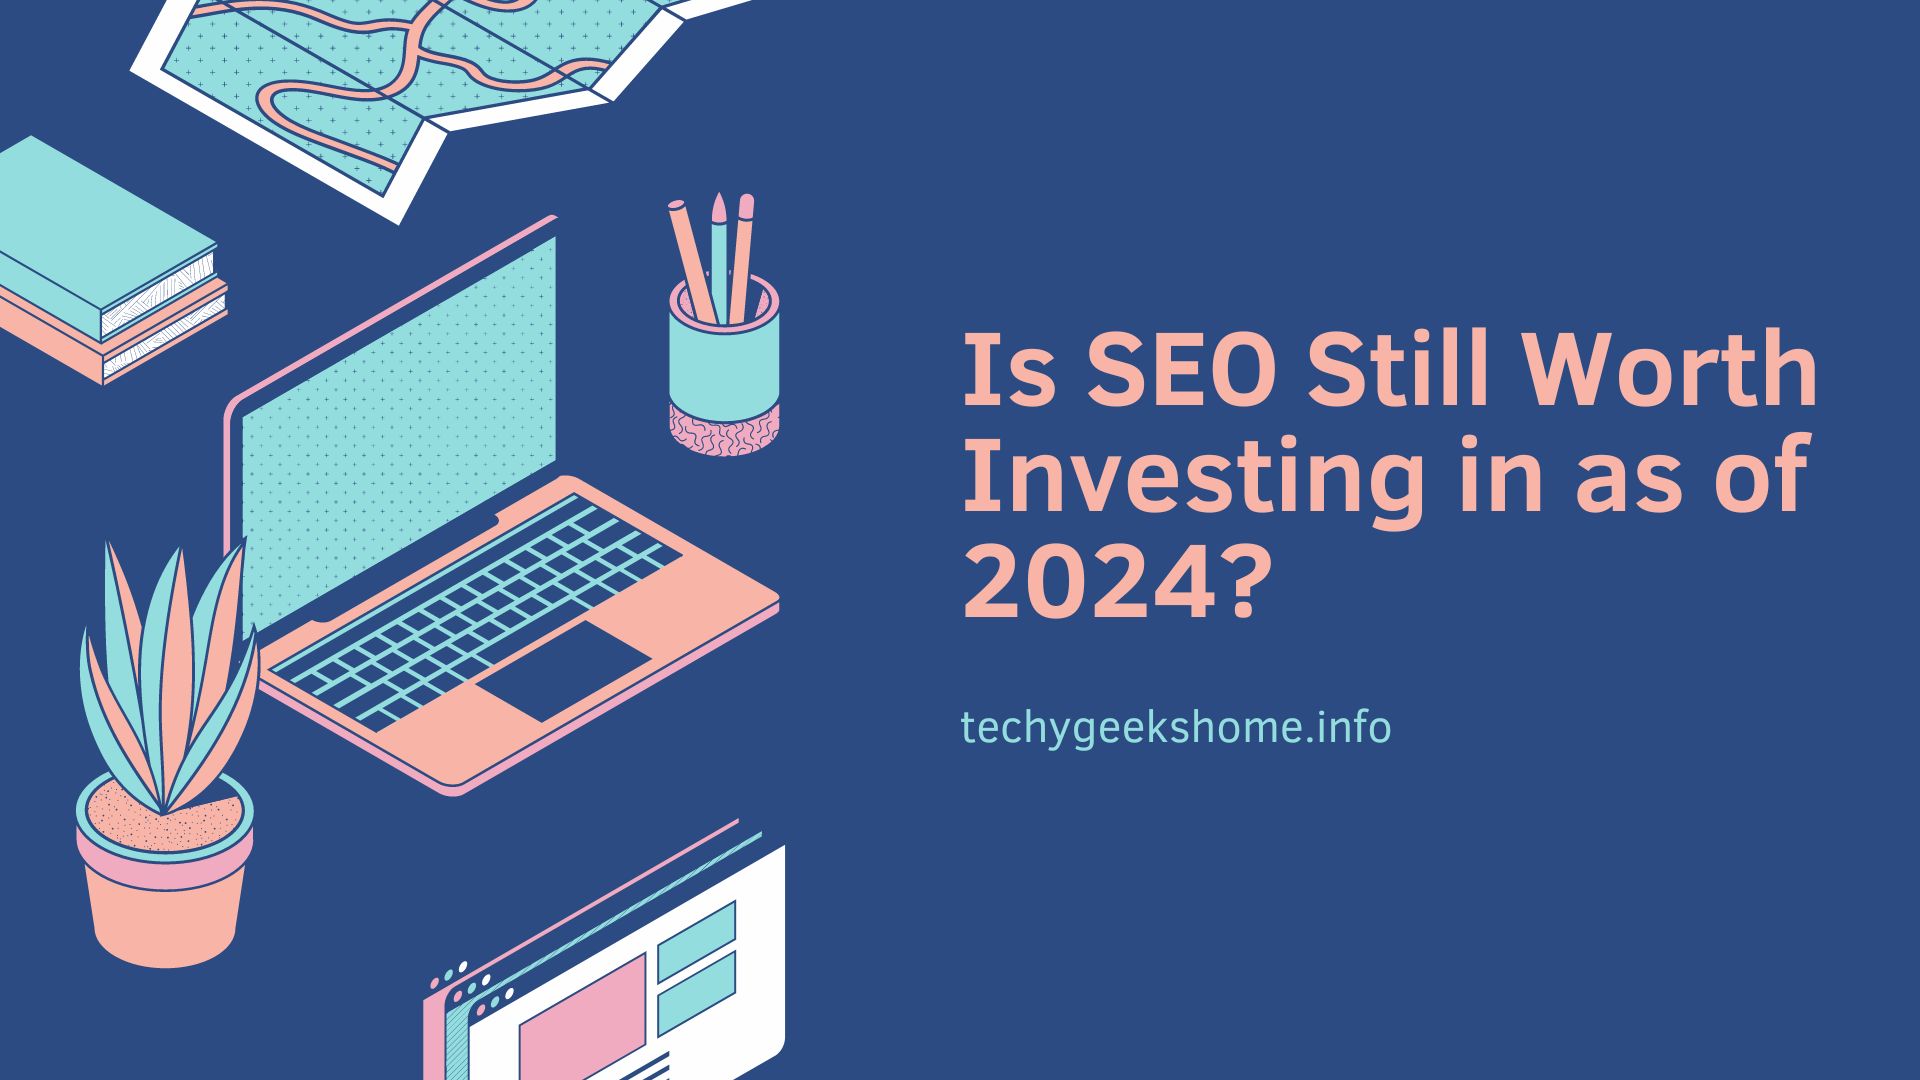 Is SEO Still Worth Investing in as of 2024